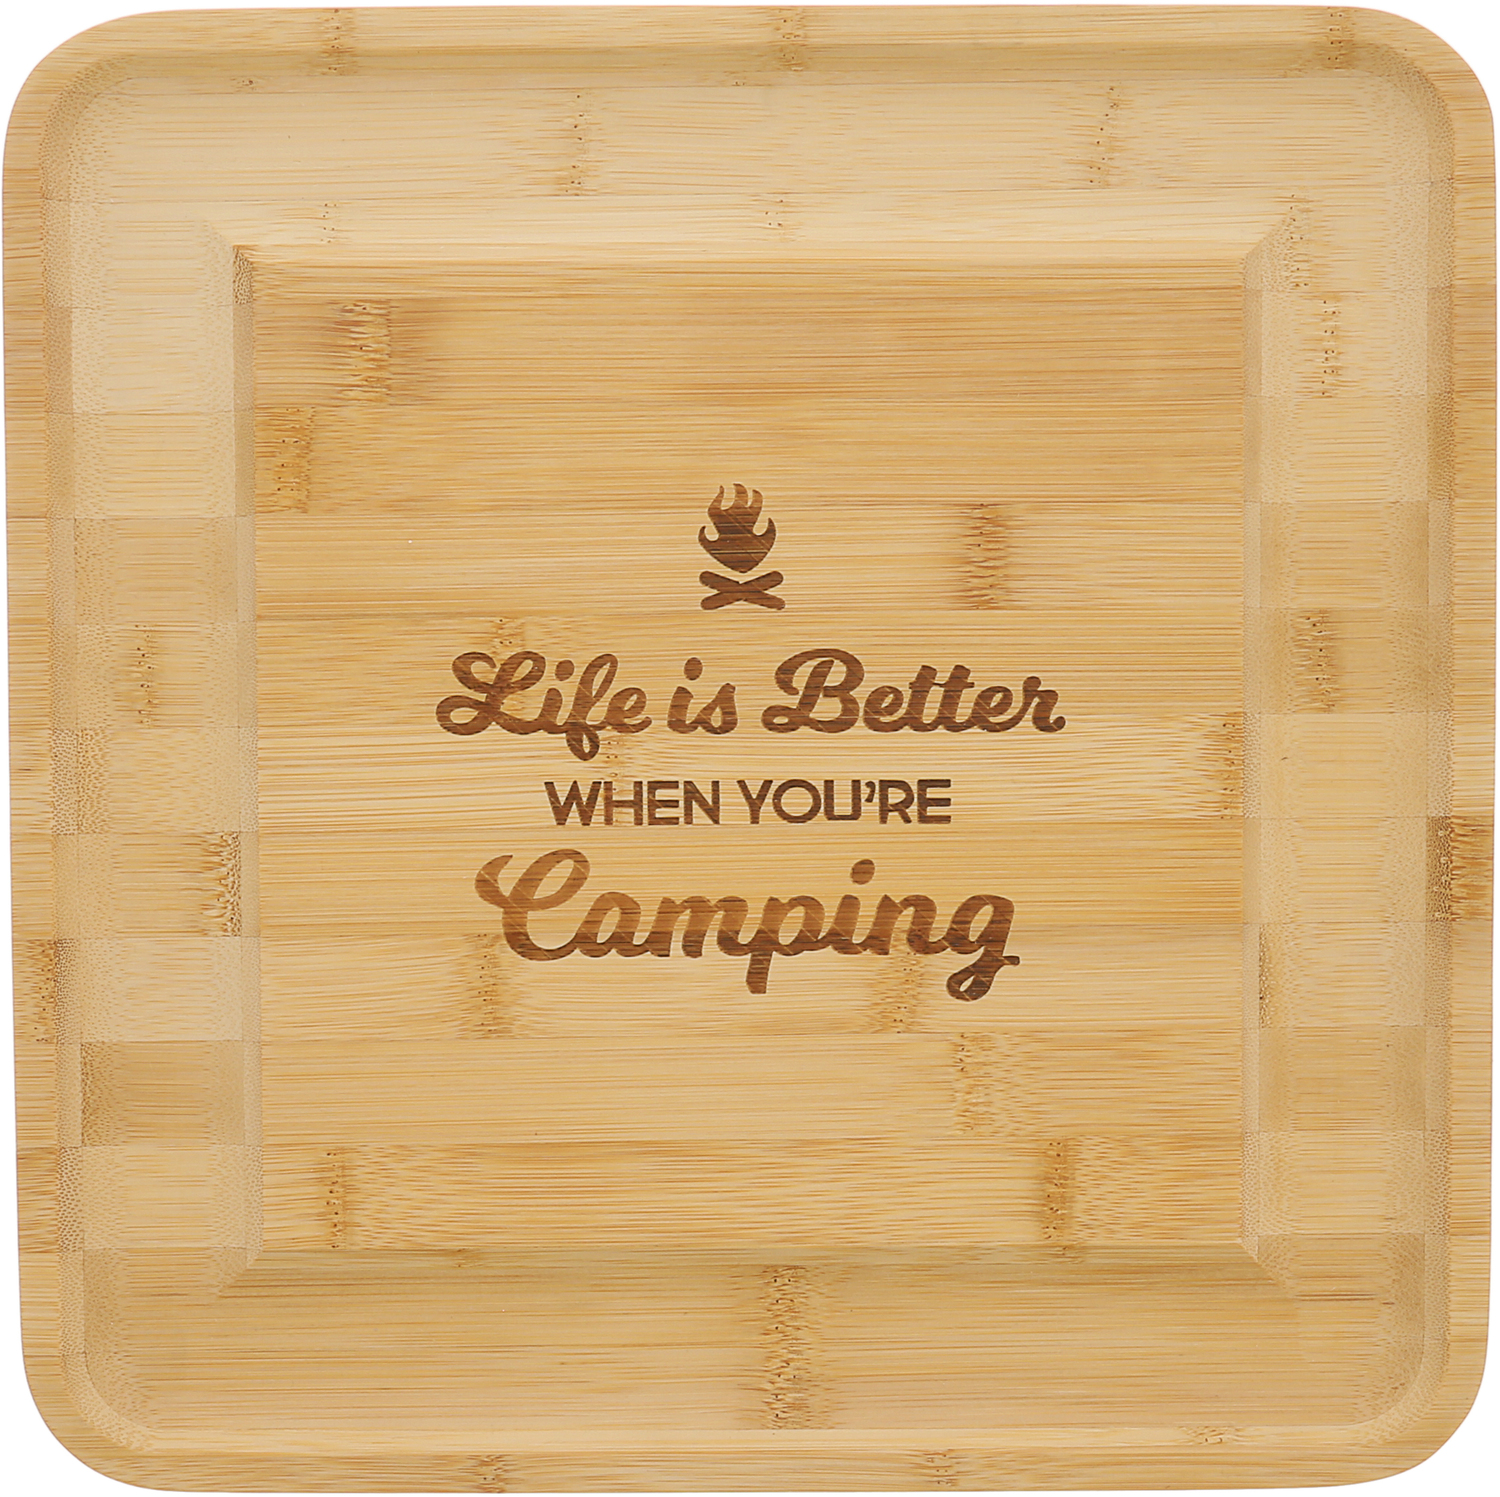 When You're Camping by We People - When You're Camping - 13" Bamboo Serving Board with Utensils